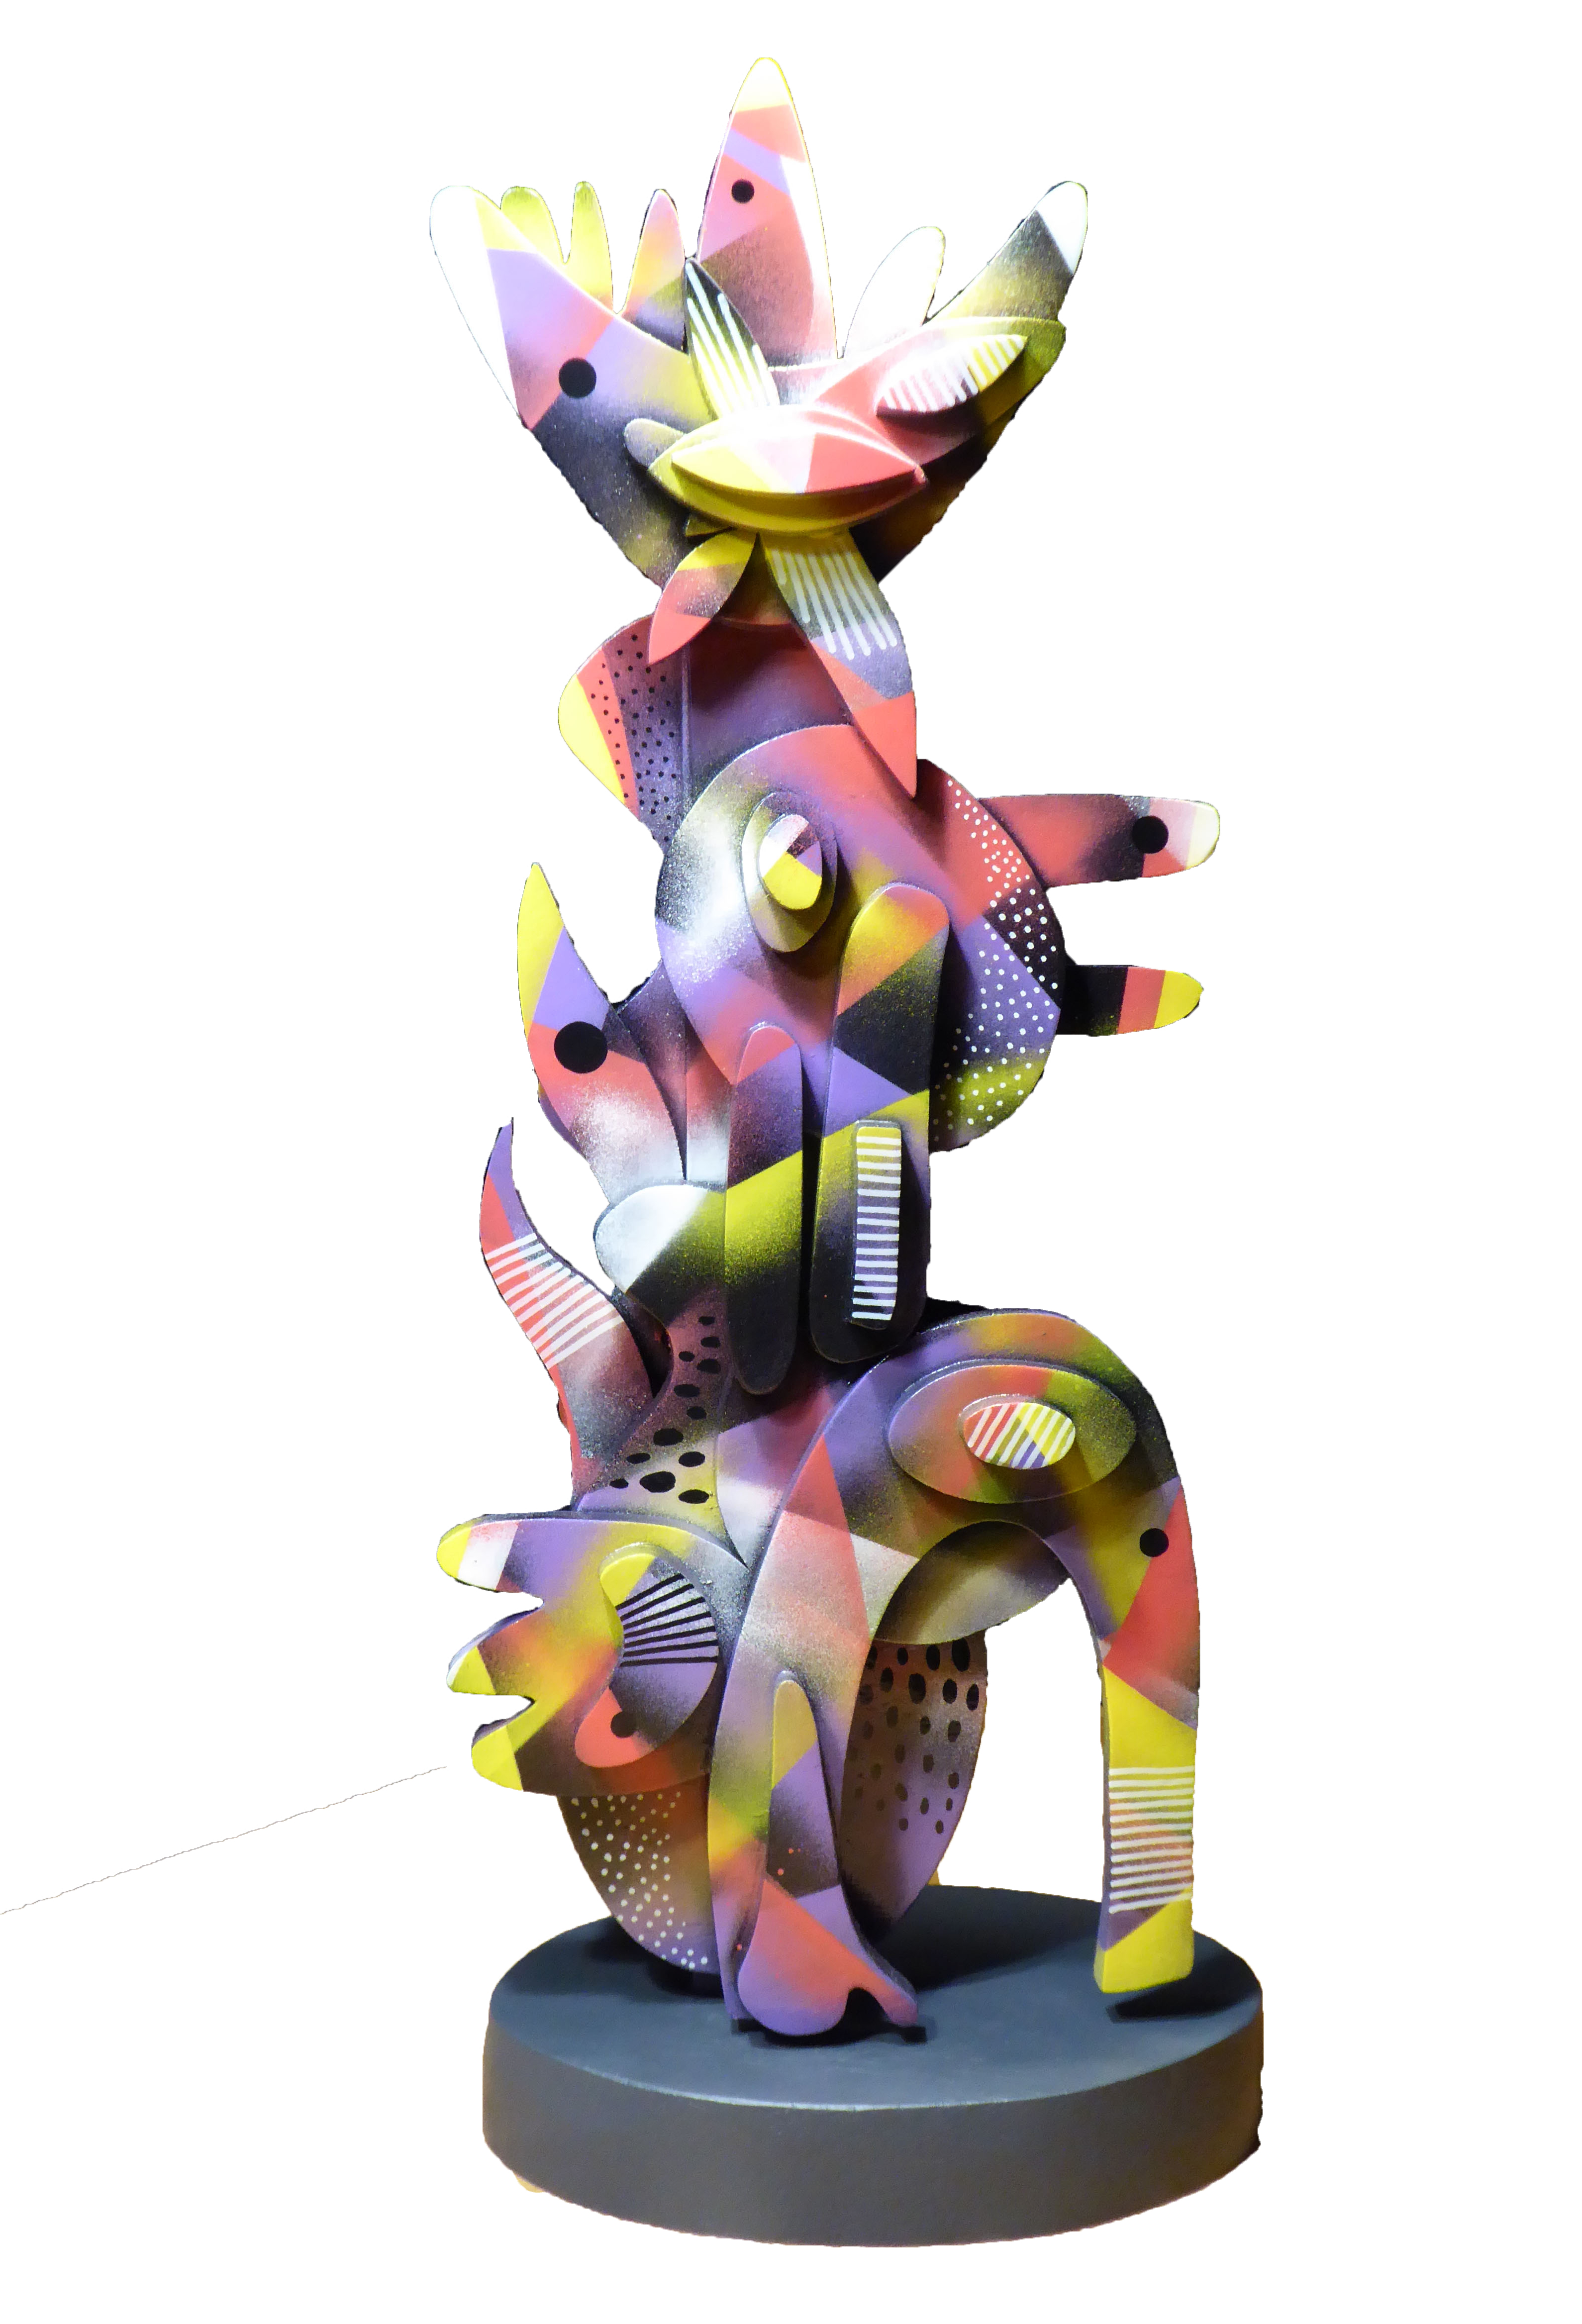 thierry_corpet_dit_raymond_x totem_iv sculpture abstrait_portrait theartcycle photo_principale.jpg The Art Cycle